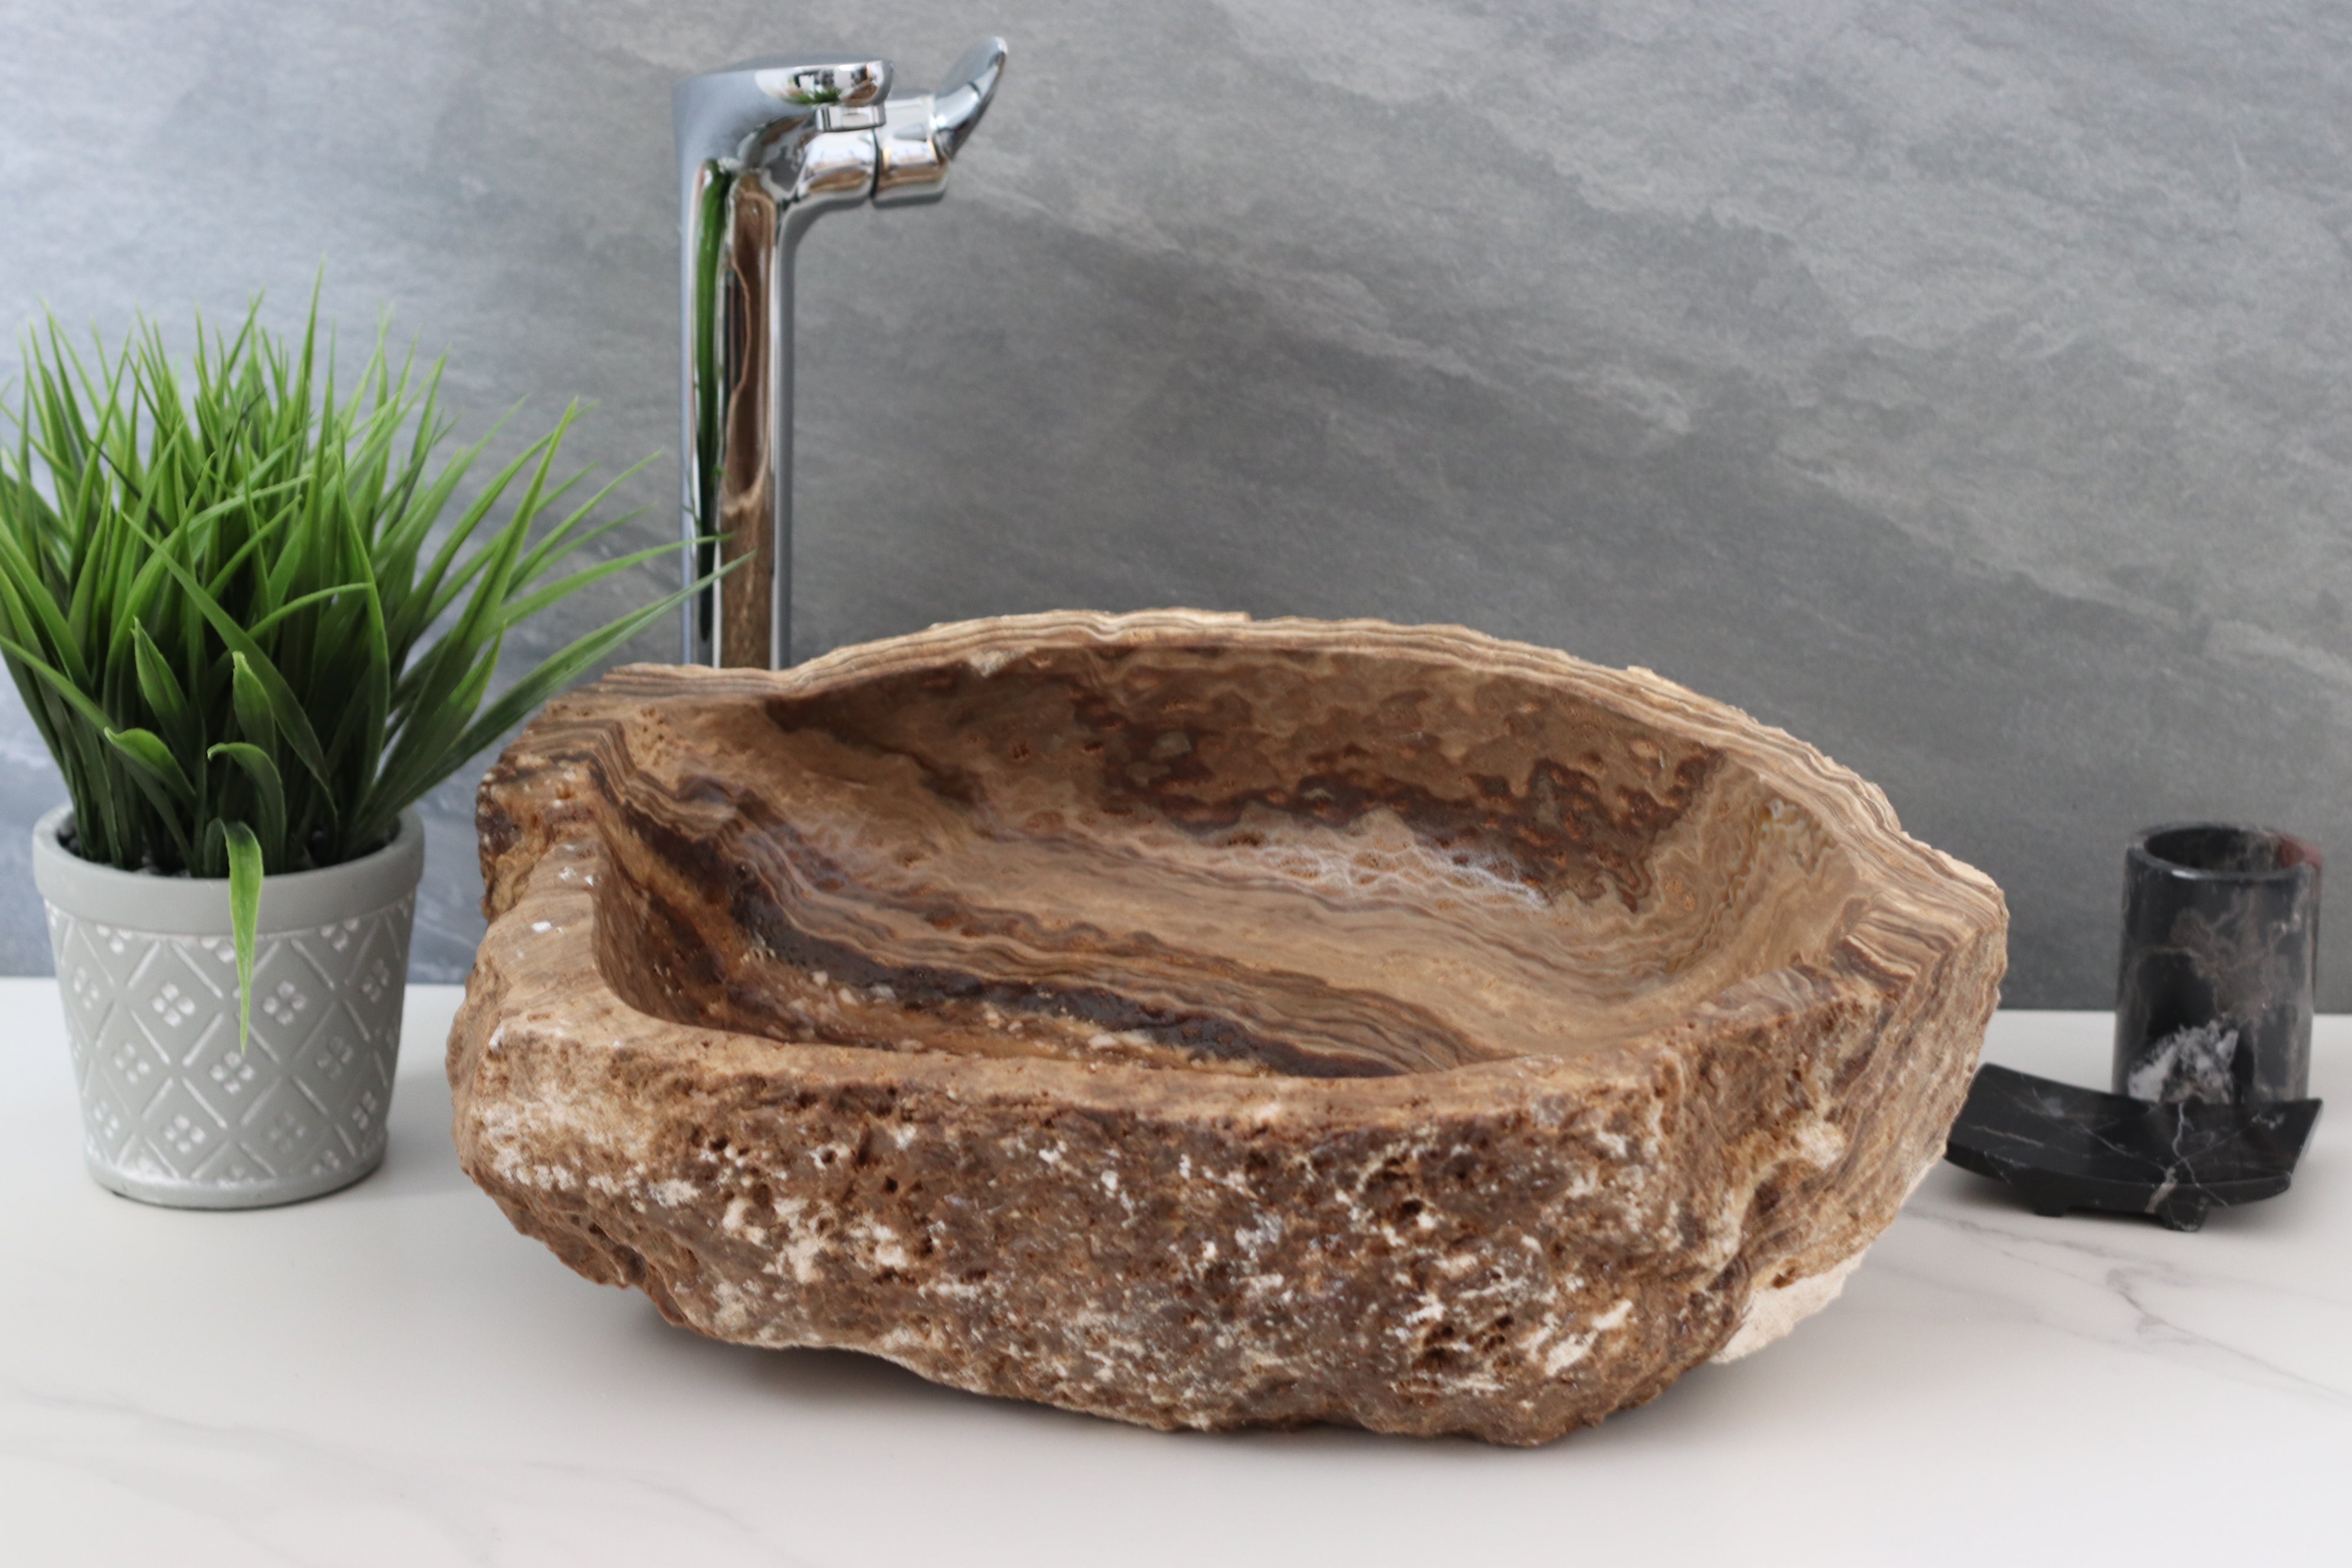 Epoxy Coated Dark Brown and Beige Onyx Vessel Sink. Handmade in Mexico. We hand finish, package, and ship from the USA. Buy now at www.felipeandgrace.com. 